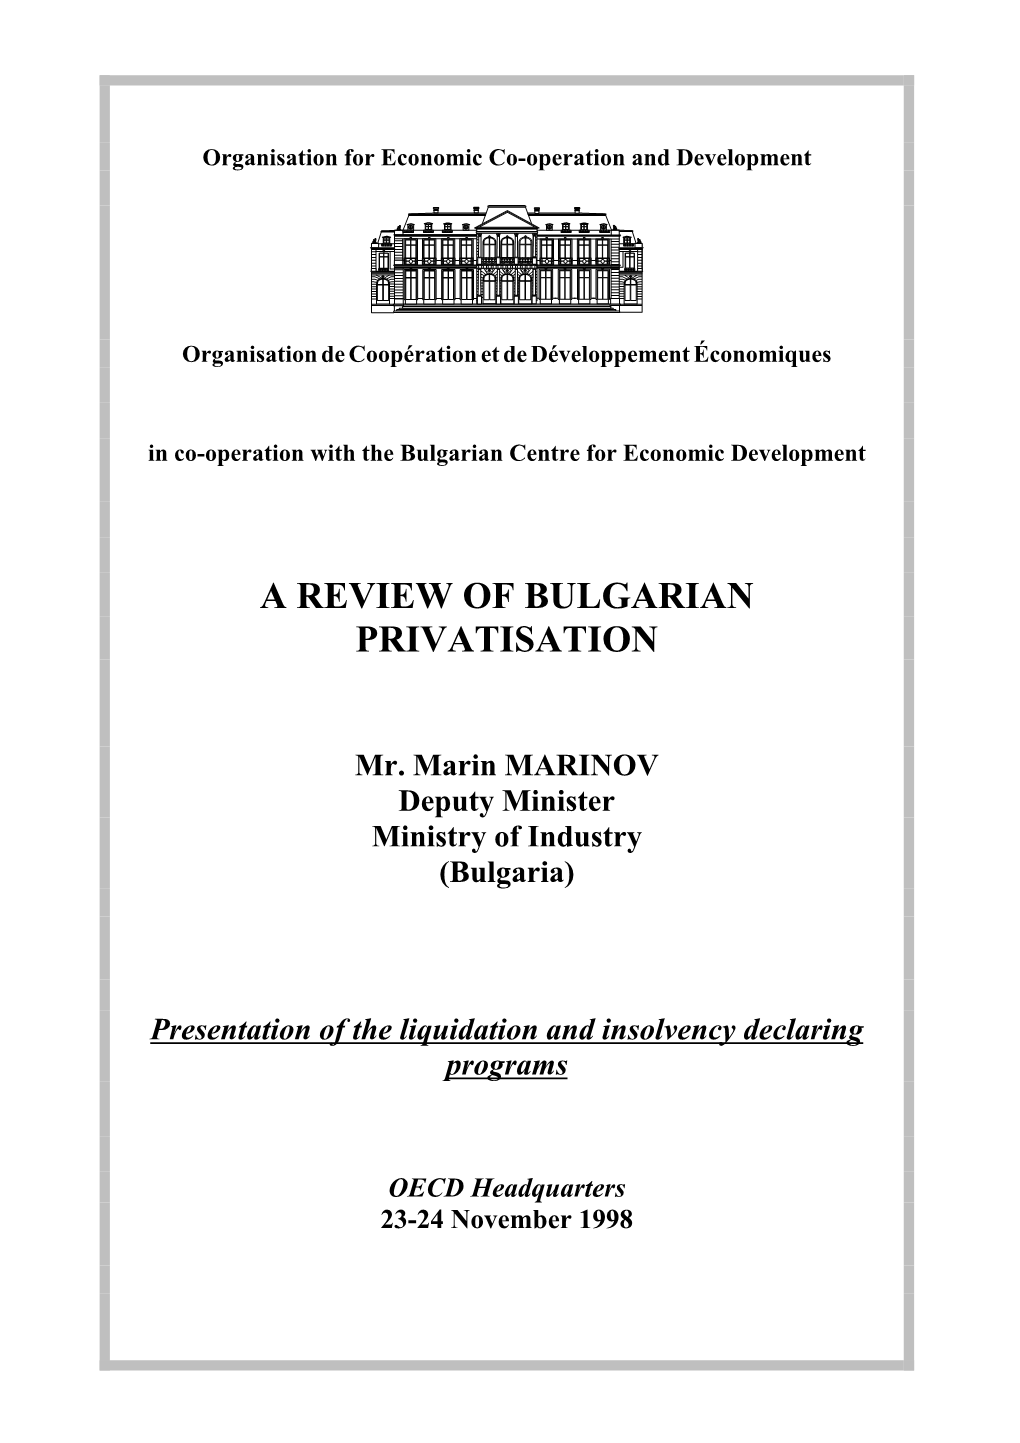 A Review of Bulgarian Privatisation